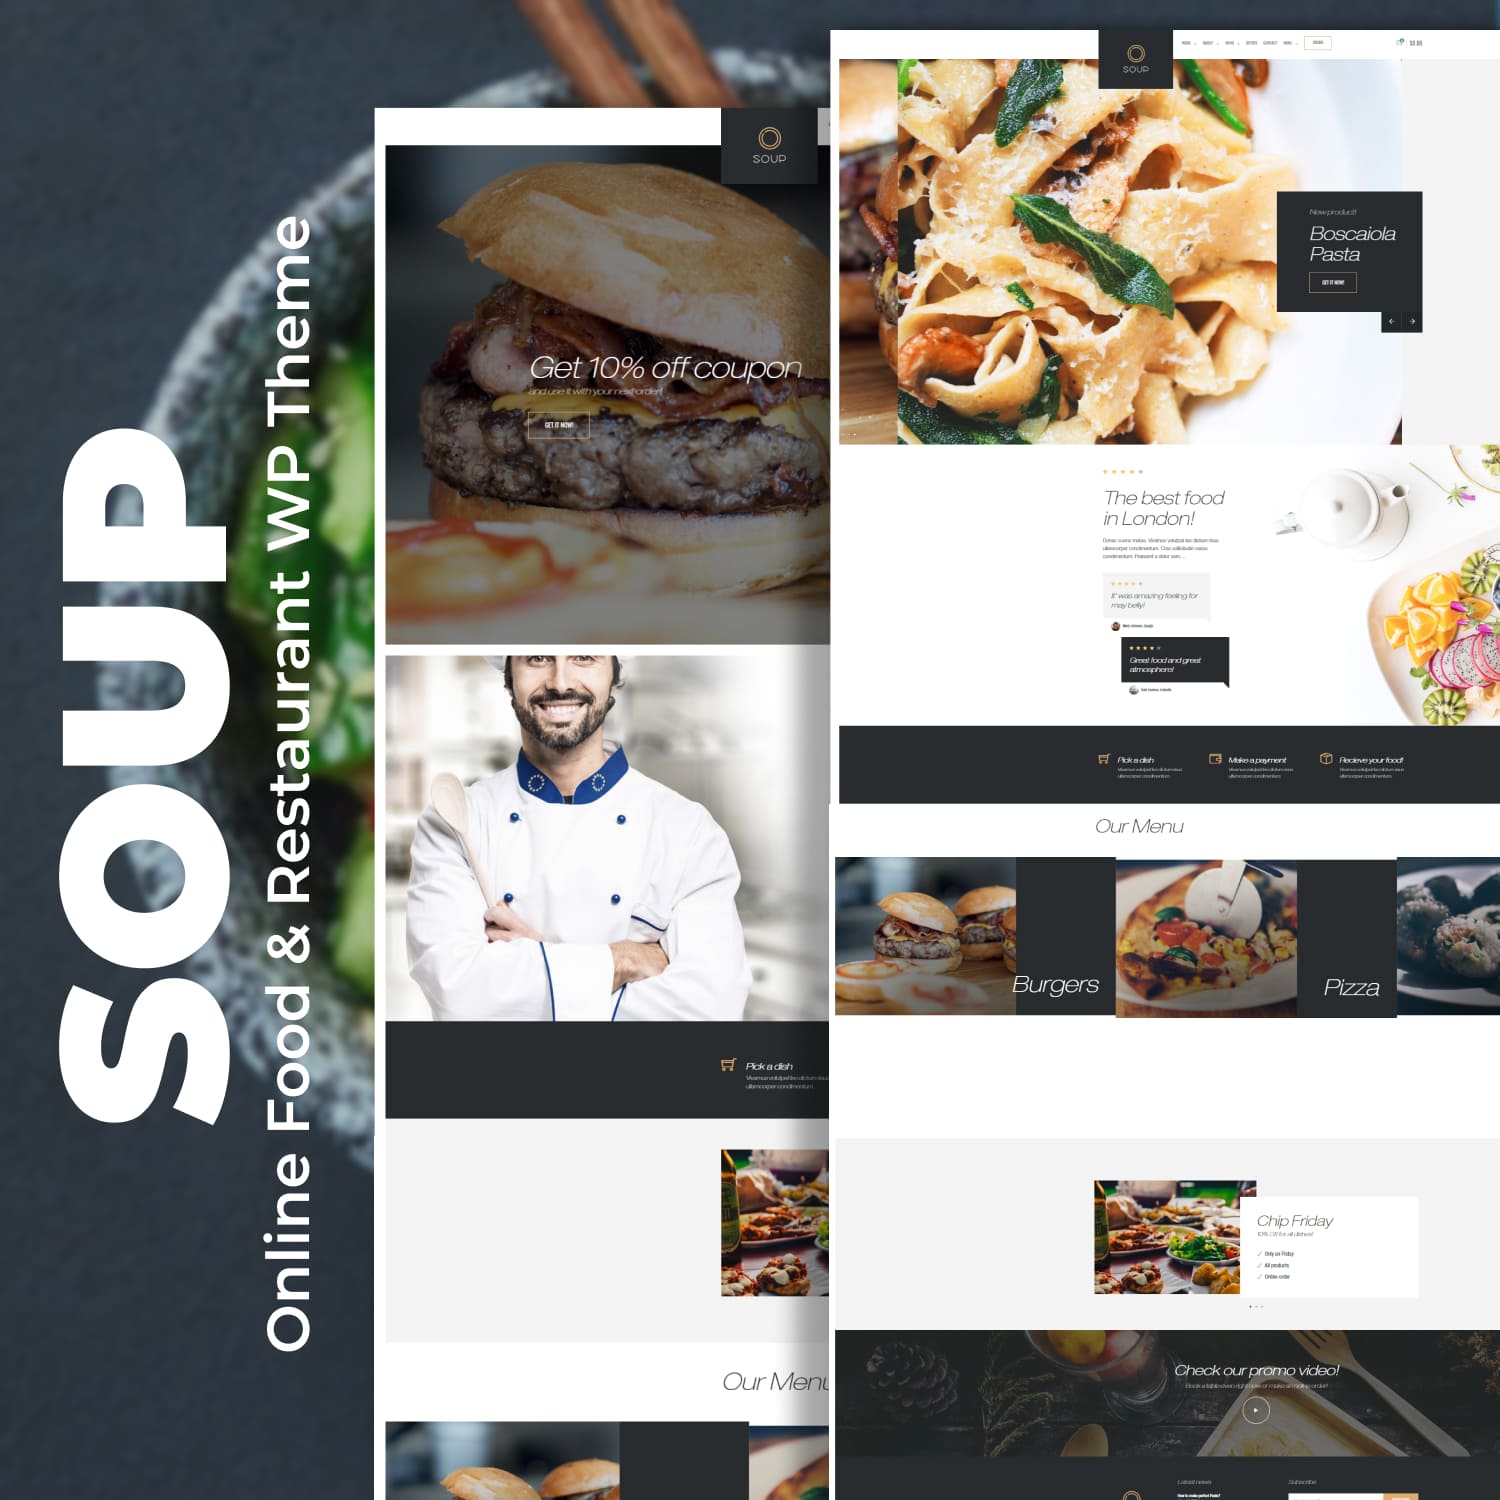 Burgers, pizza and sushi of the Soup - Online Food & Restaurant WP Theme.